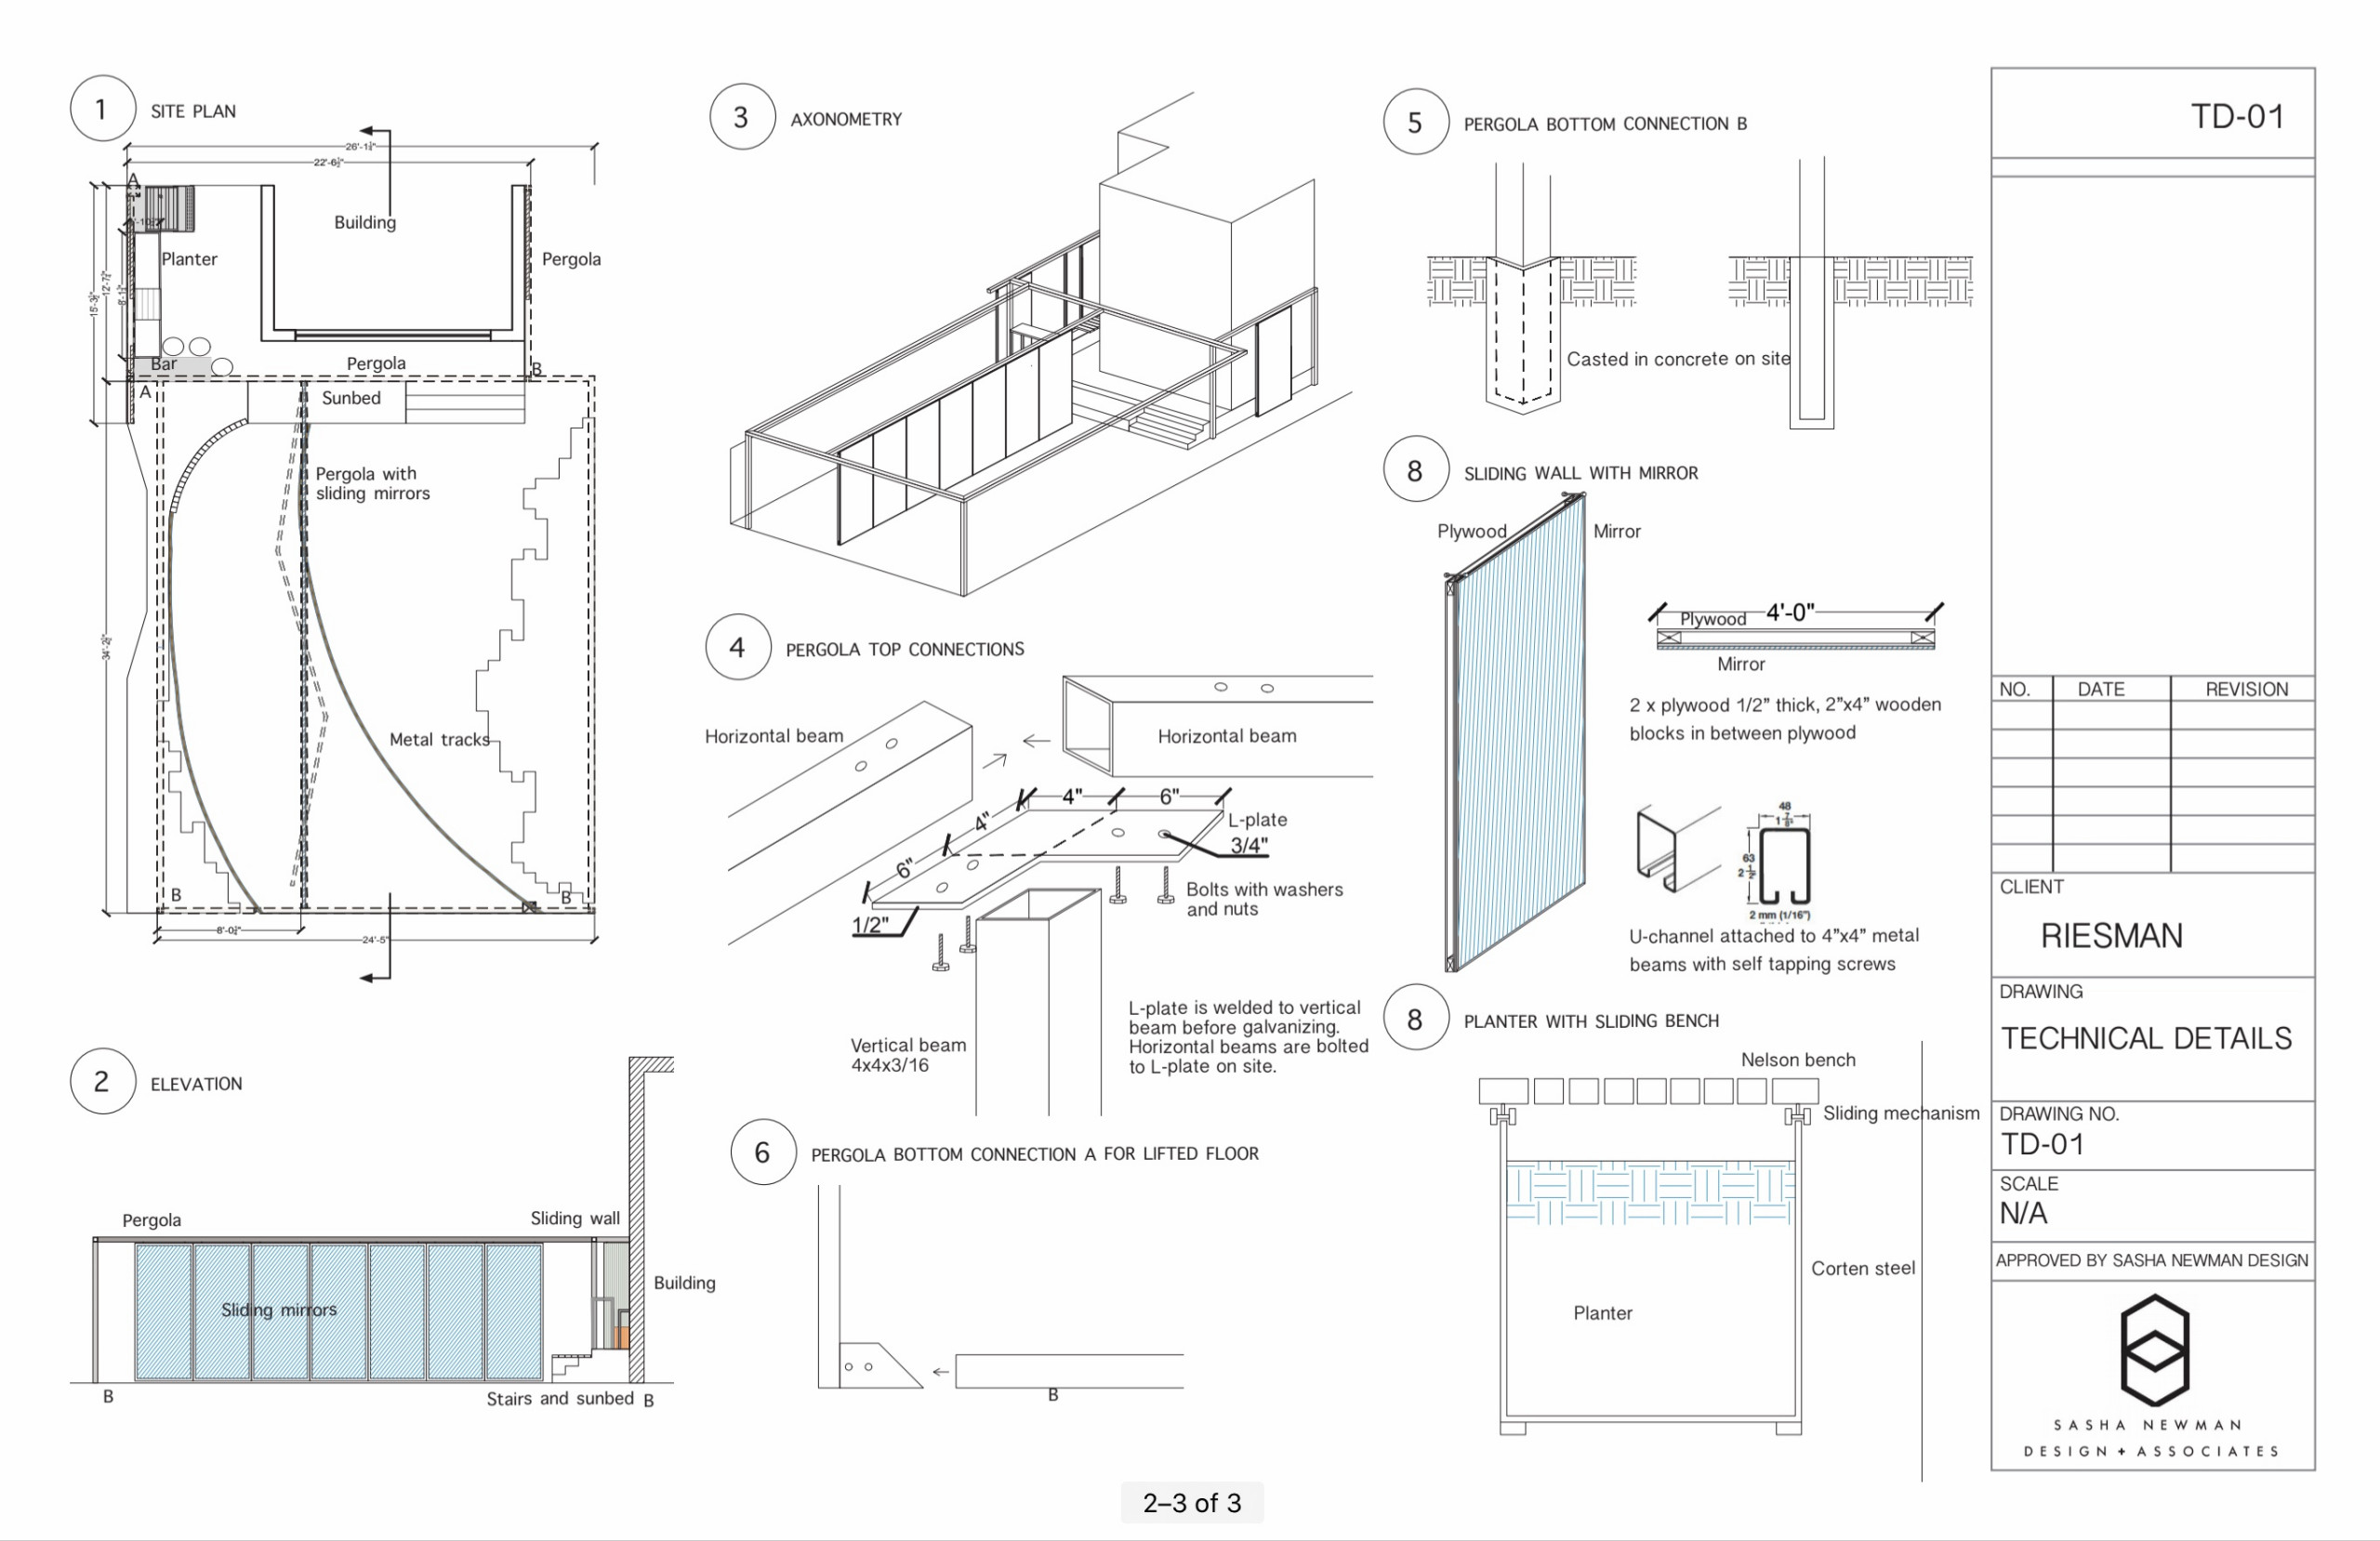 CAD Drawings presentation with details and 3D renderings